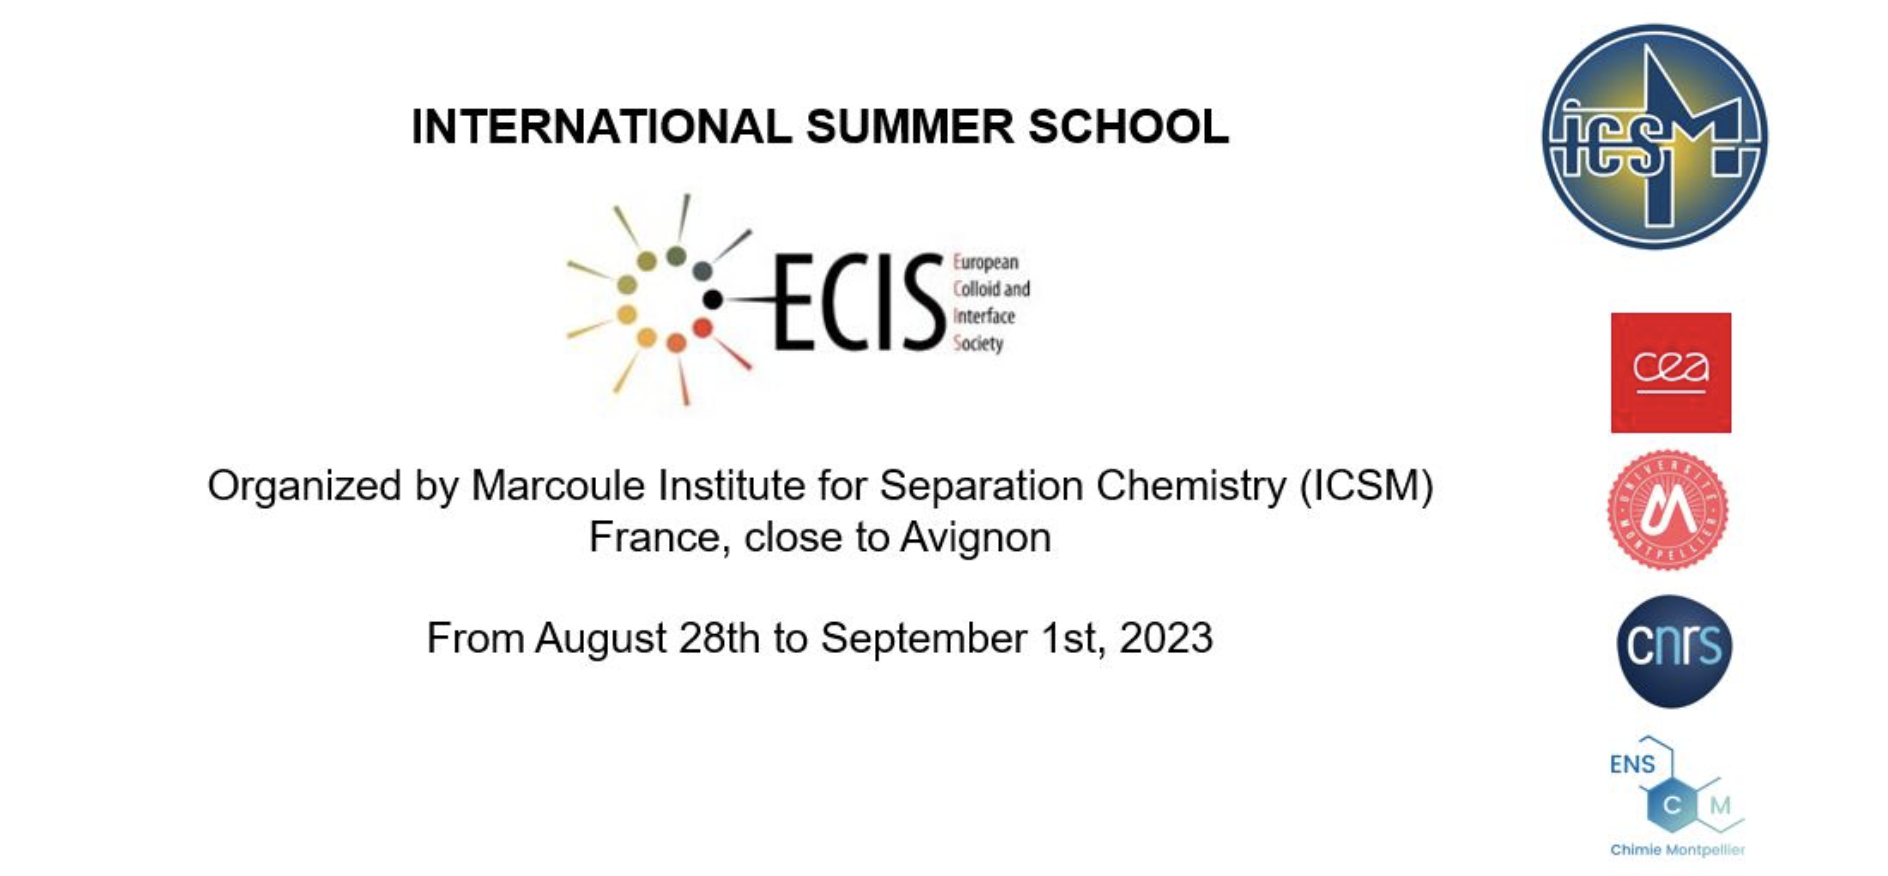 ECIS European Colloid and Interface Society